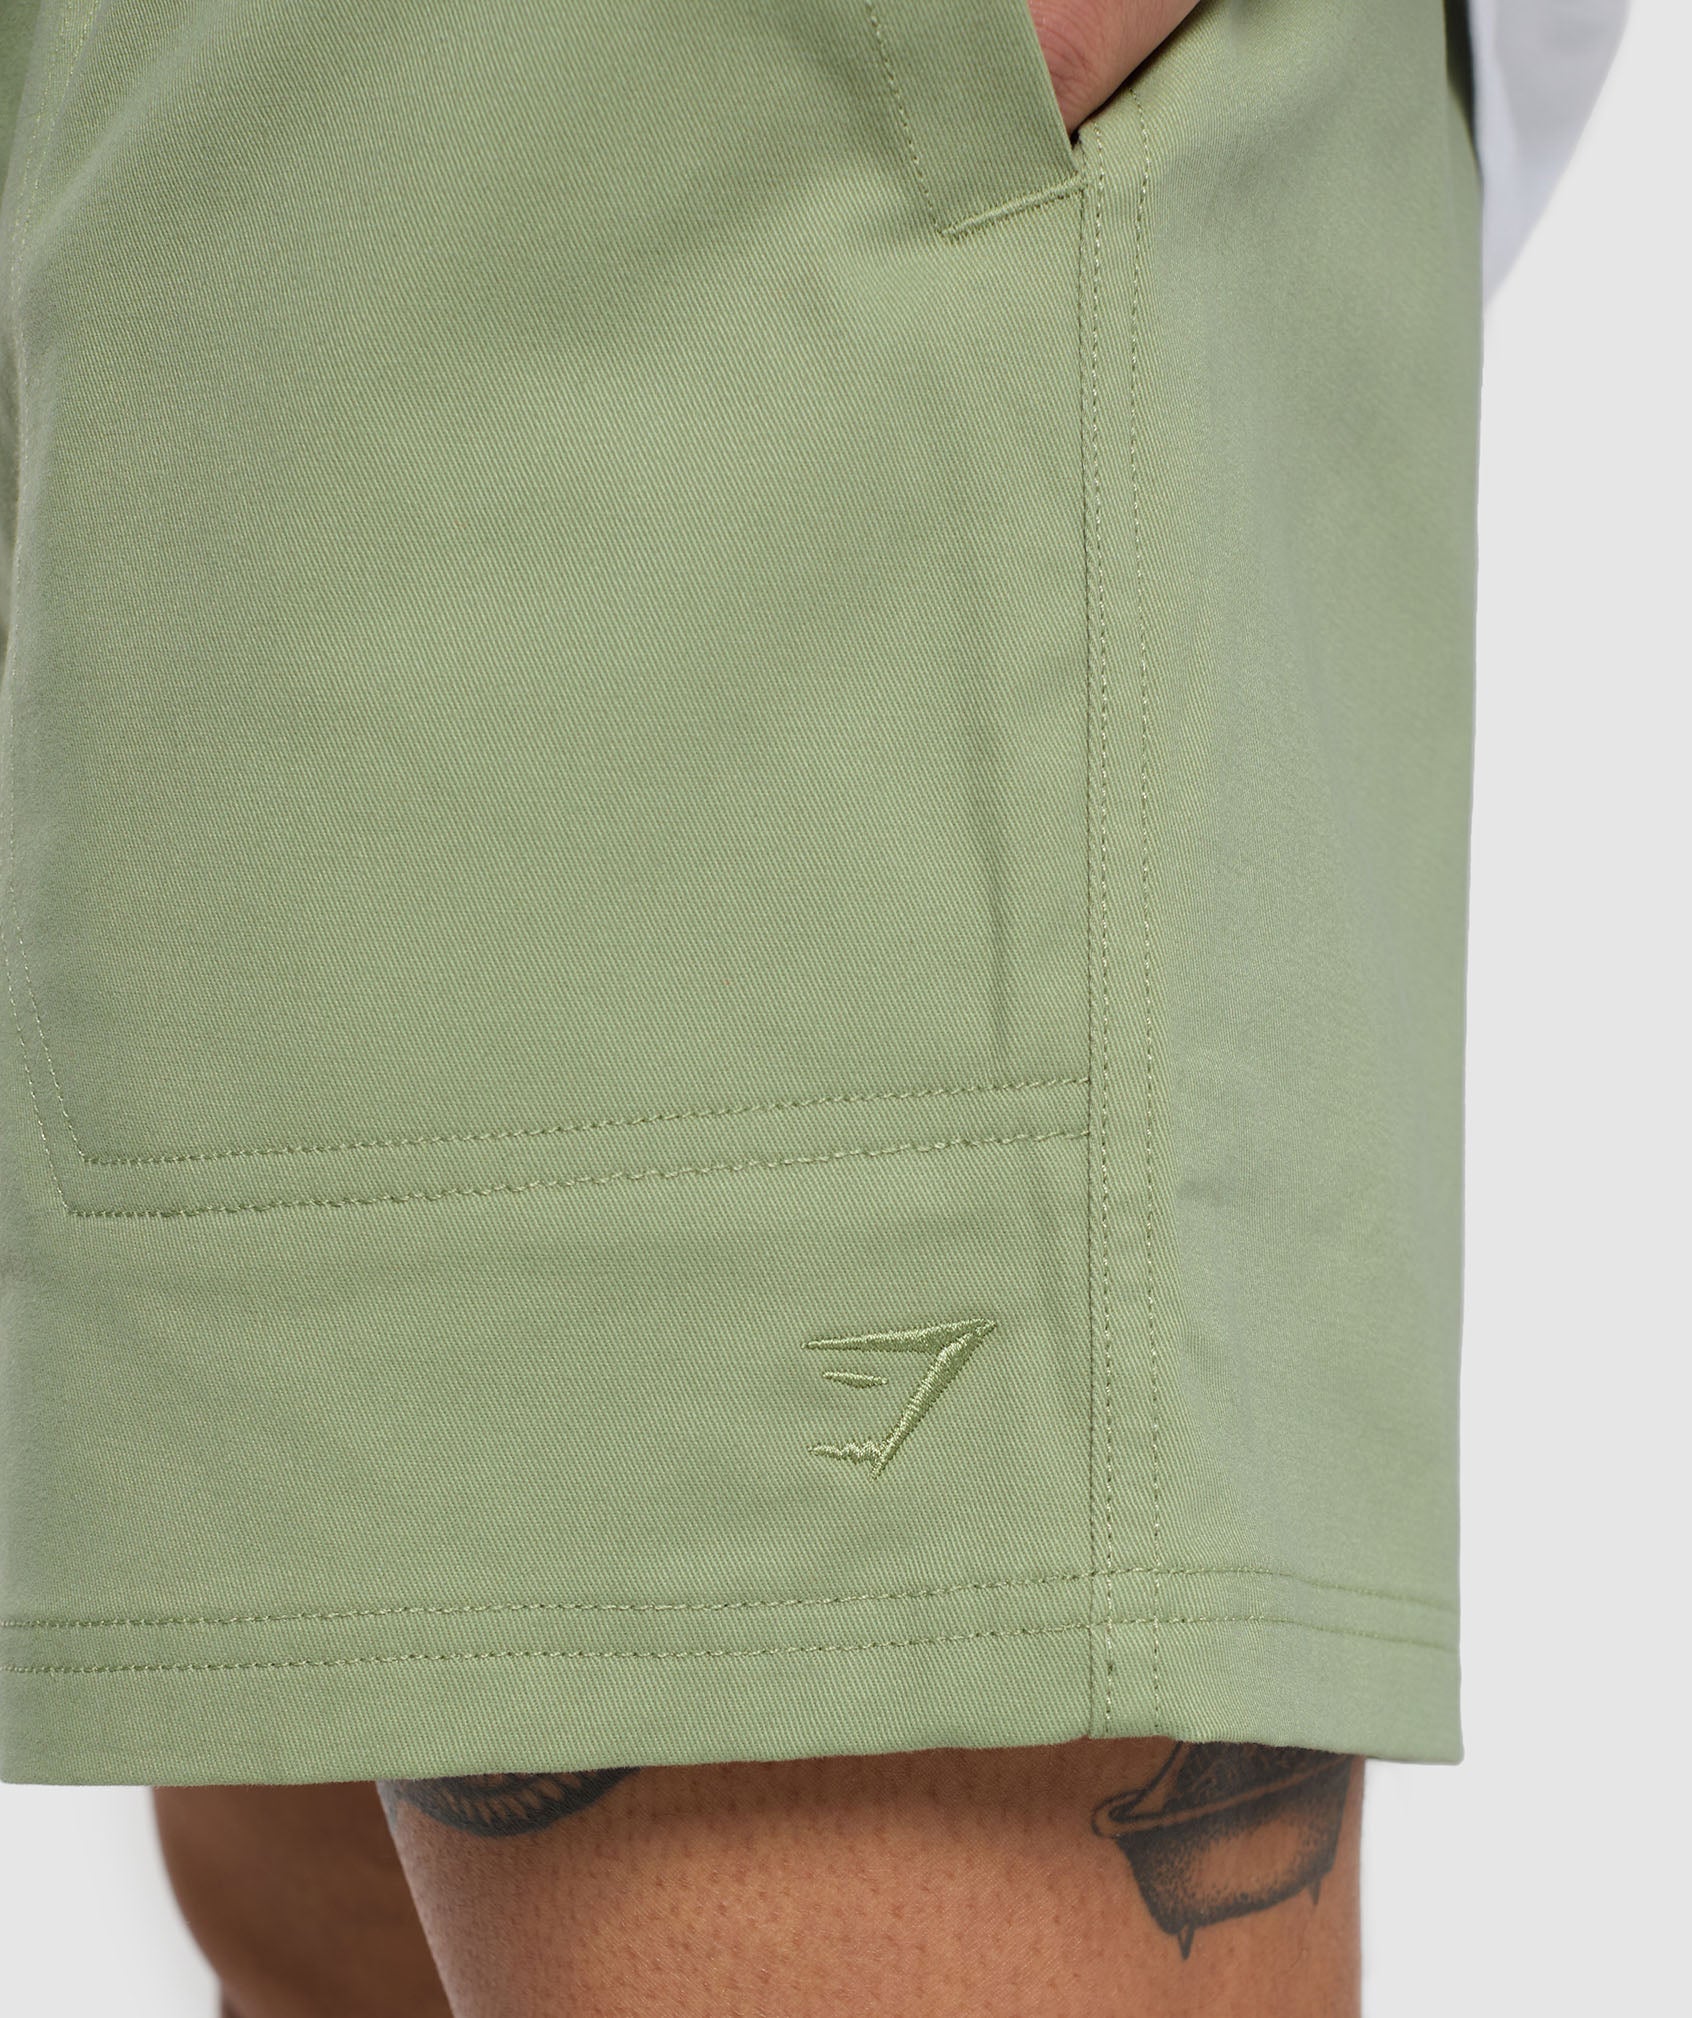 Rest Day Woven Shorts in Natural Sage Green - view 6